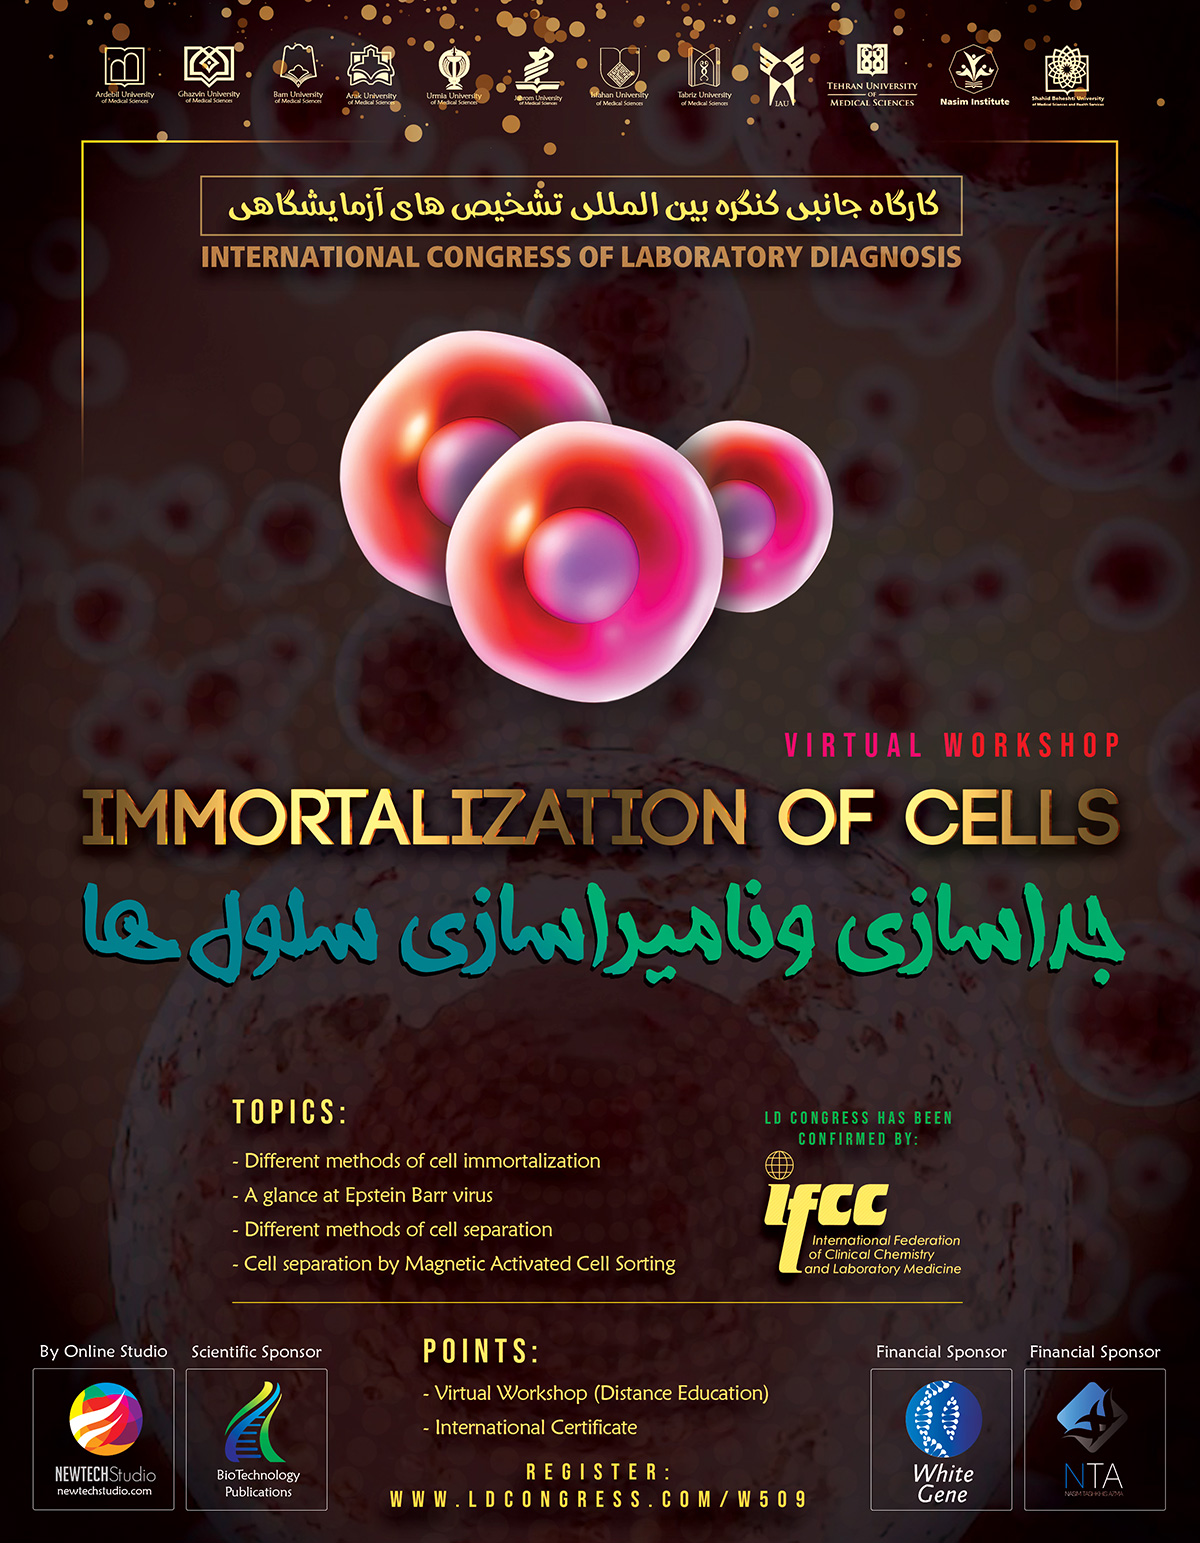 Cell separation and immortalization